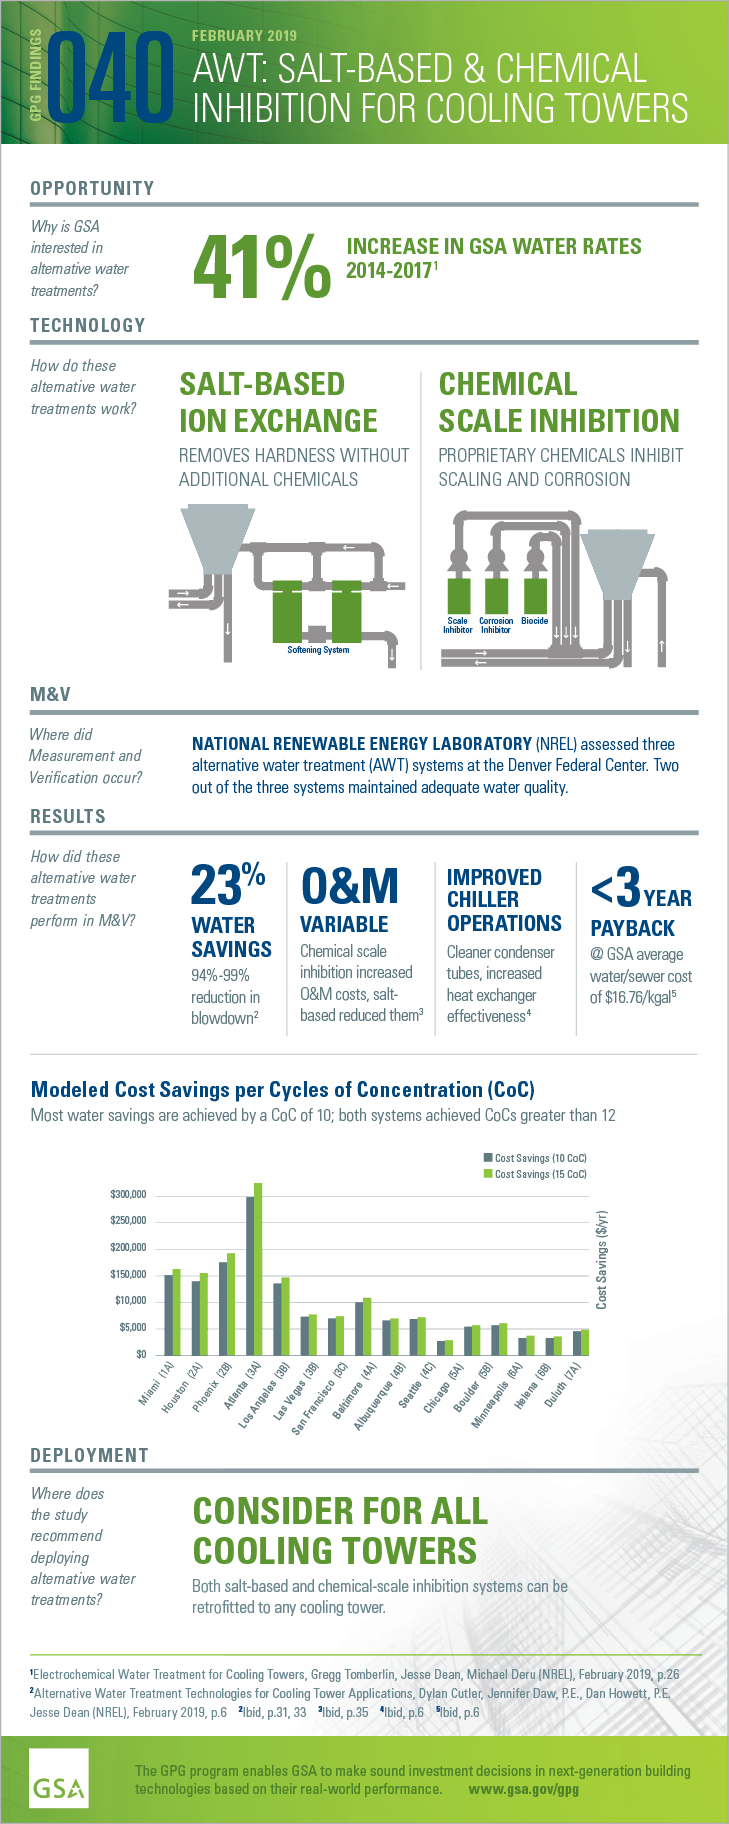 Download the PDF version of the full-sized infographic for GPG040 Salt-Based & Chemical Inhibition.